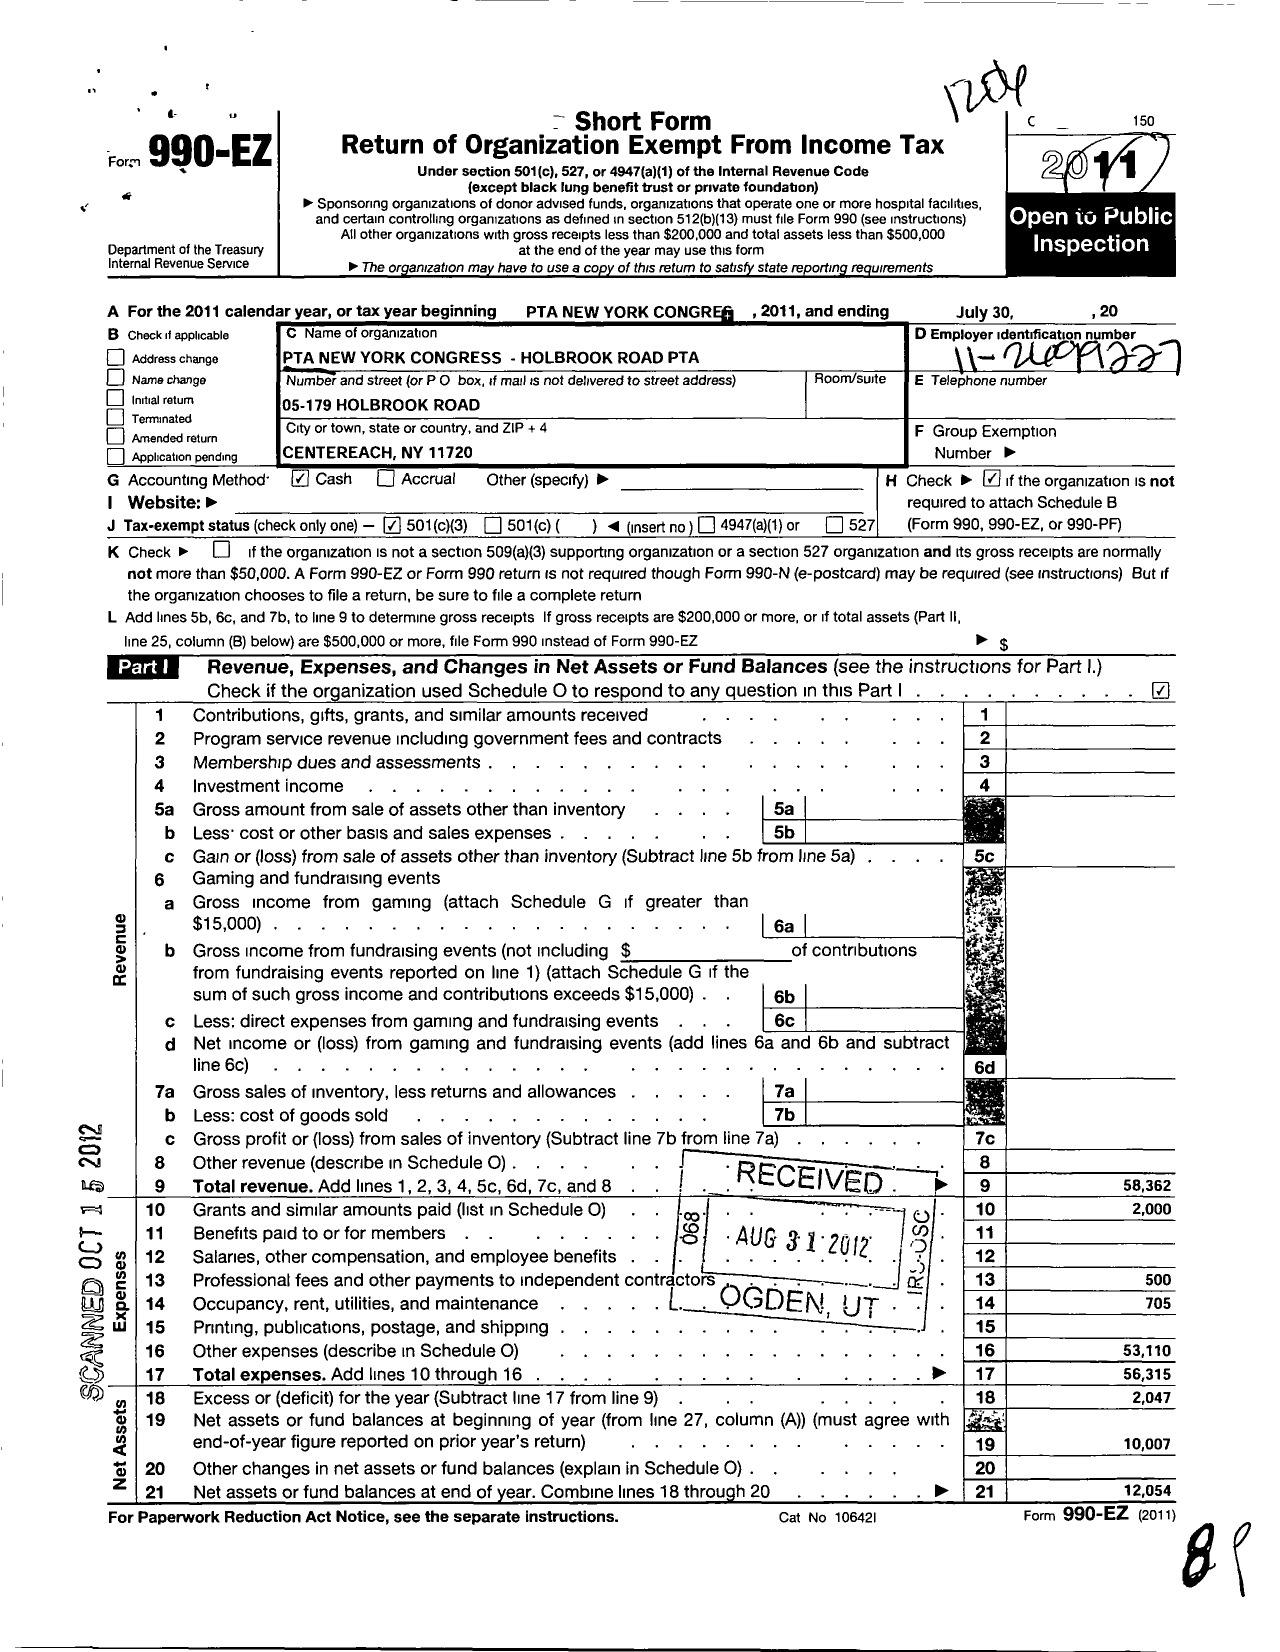 Image of first page of 2010 Form 990EZ for New York State PTA - 005-179 Holbrook Road PTA